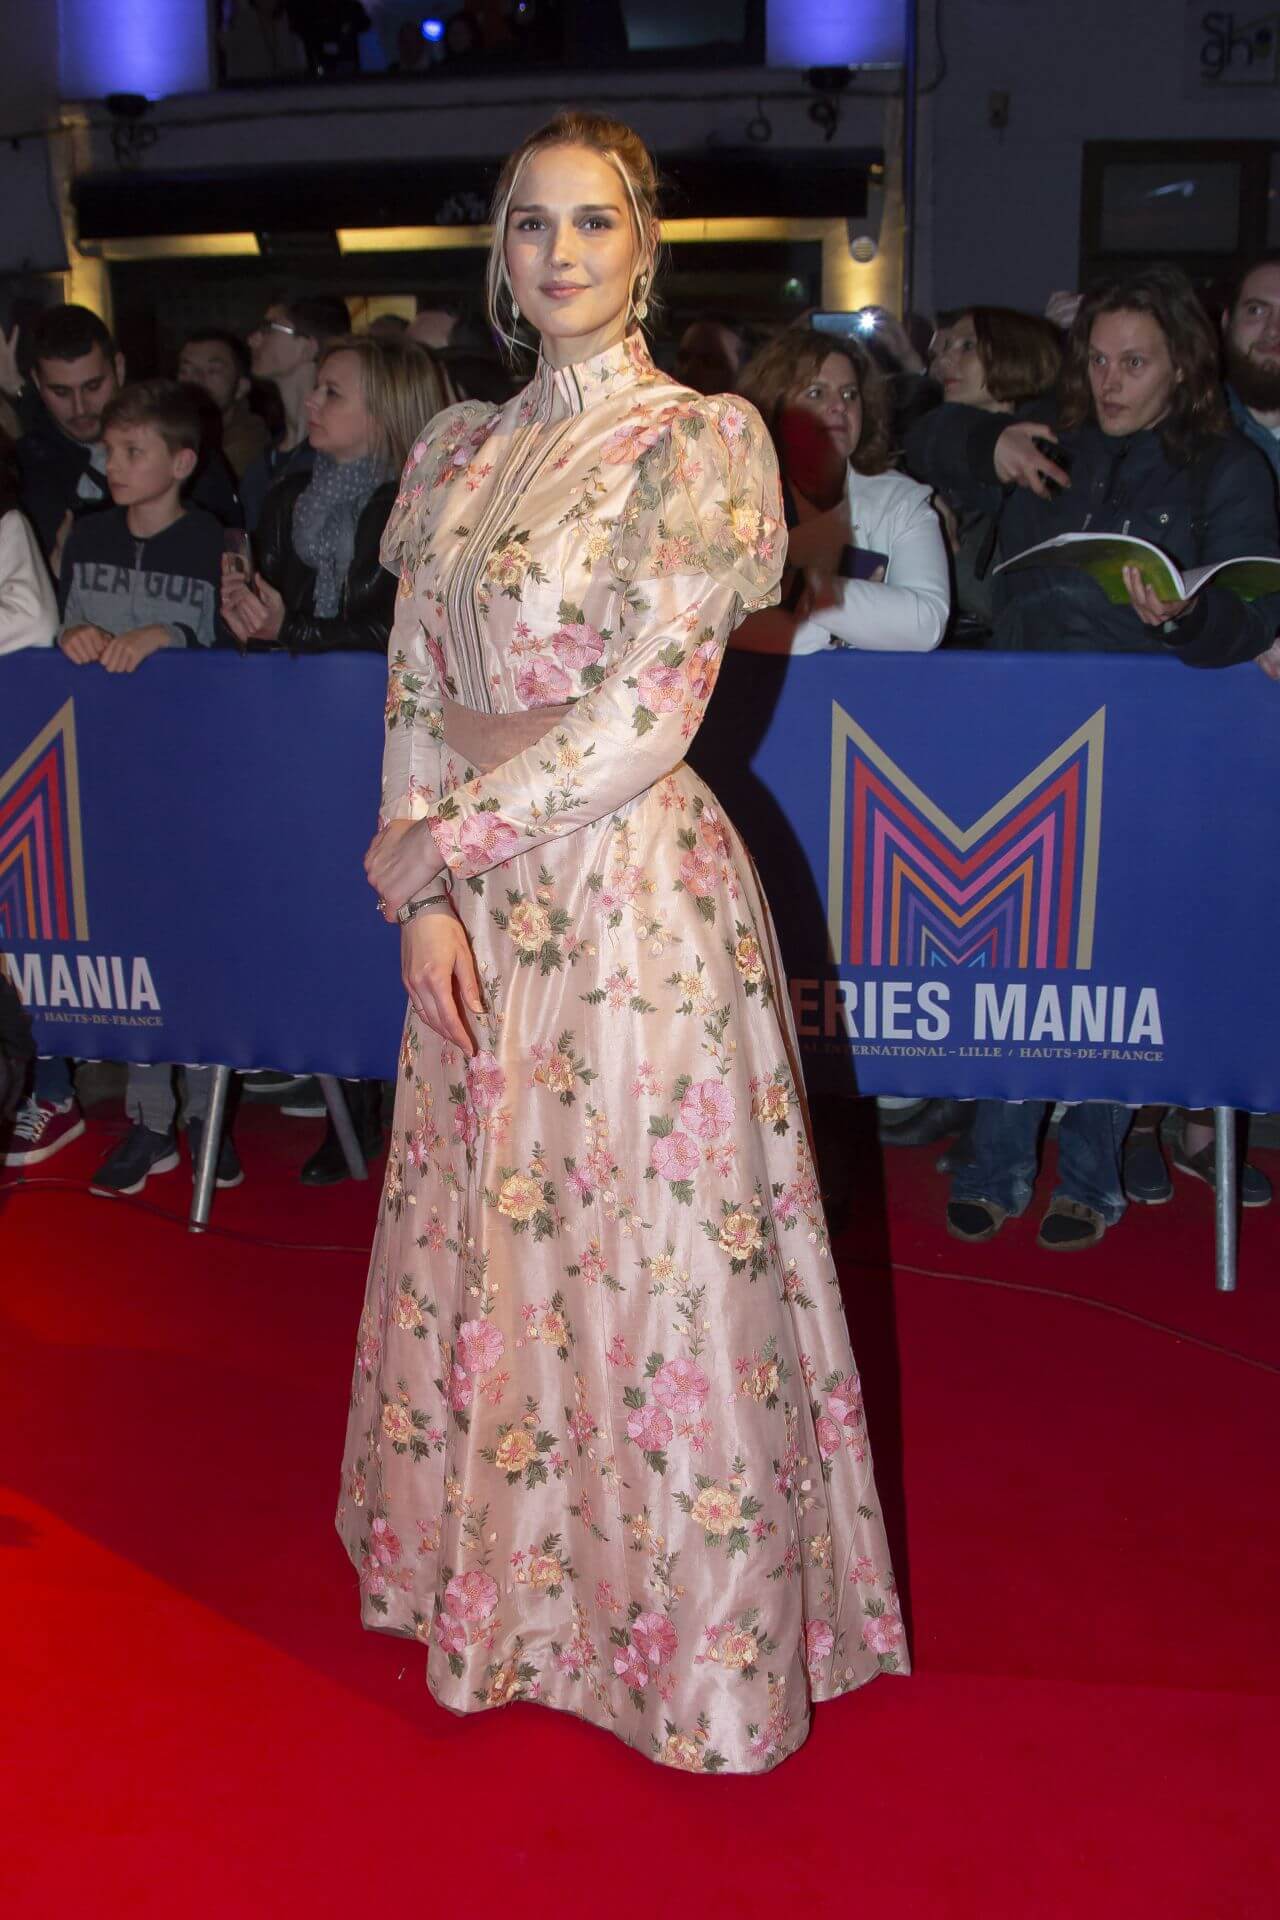 Camille Lou In Floral Print Full Sleeves Crop Top With Long Skirt Outfit At Series Mania Festival Opening Ceremony in Lille